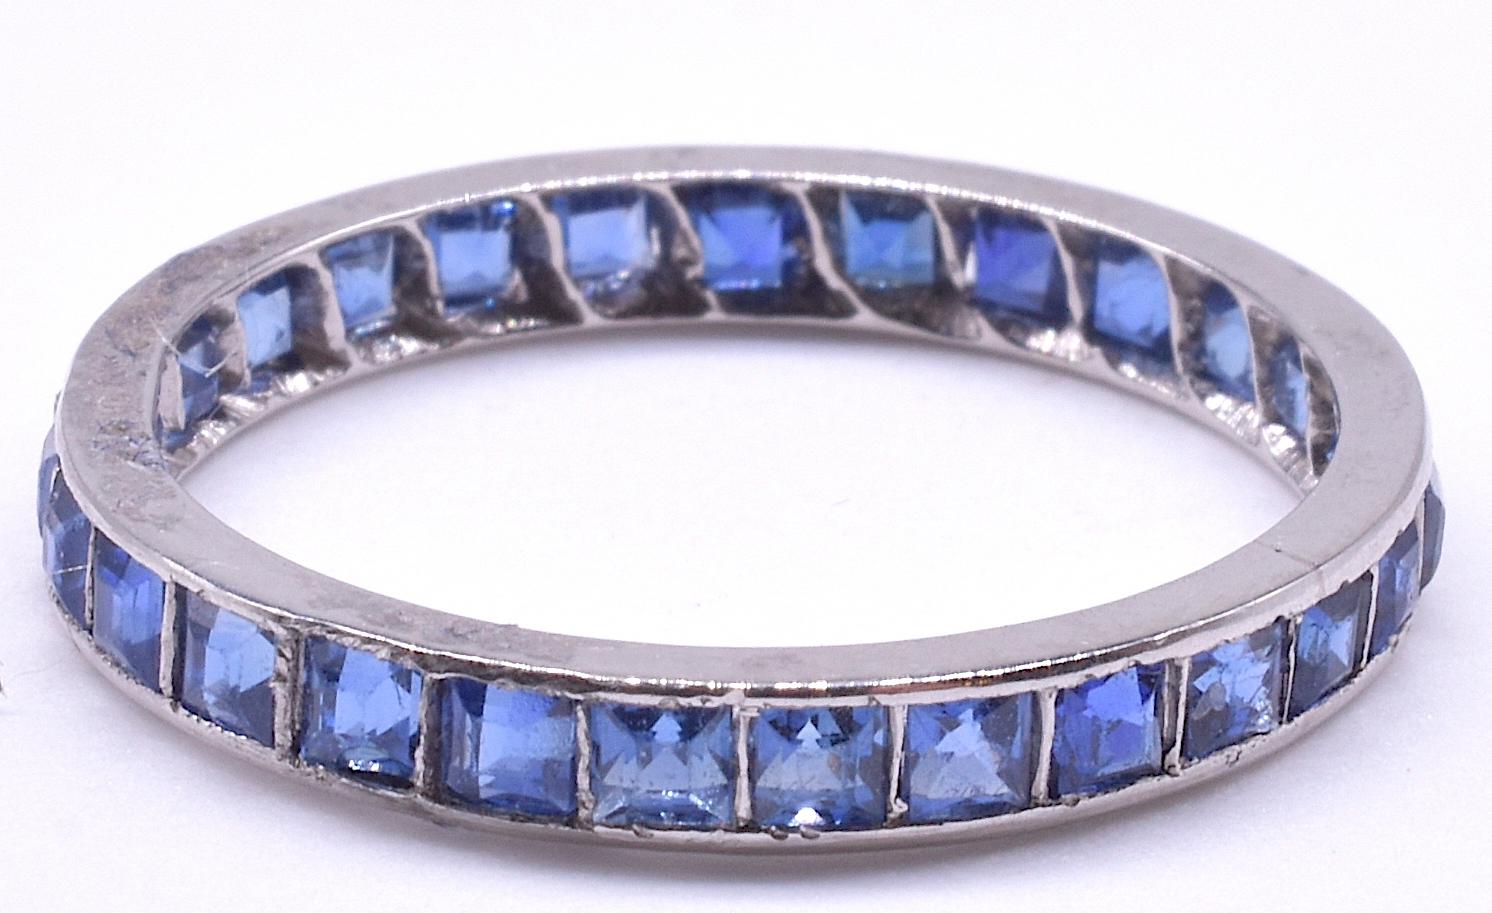 This classic Deco sapphire French cut eternity band is crafted in platinum and features 26 clear blue sapphires with a total carat weight of 1.15 carats. The band measures a US/Can. 7 ½ and is NOT size-able. It measures just over 1/16 inches